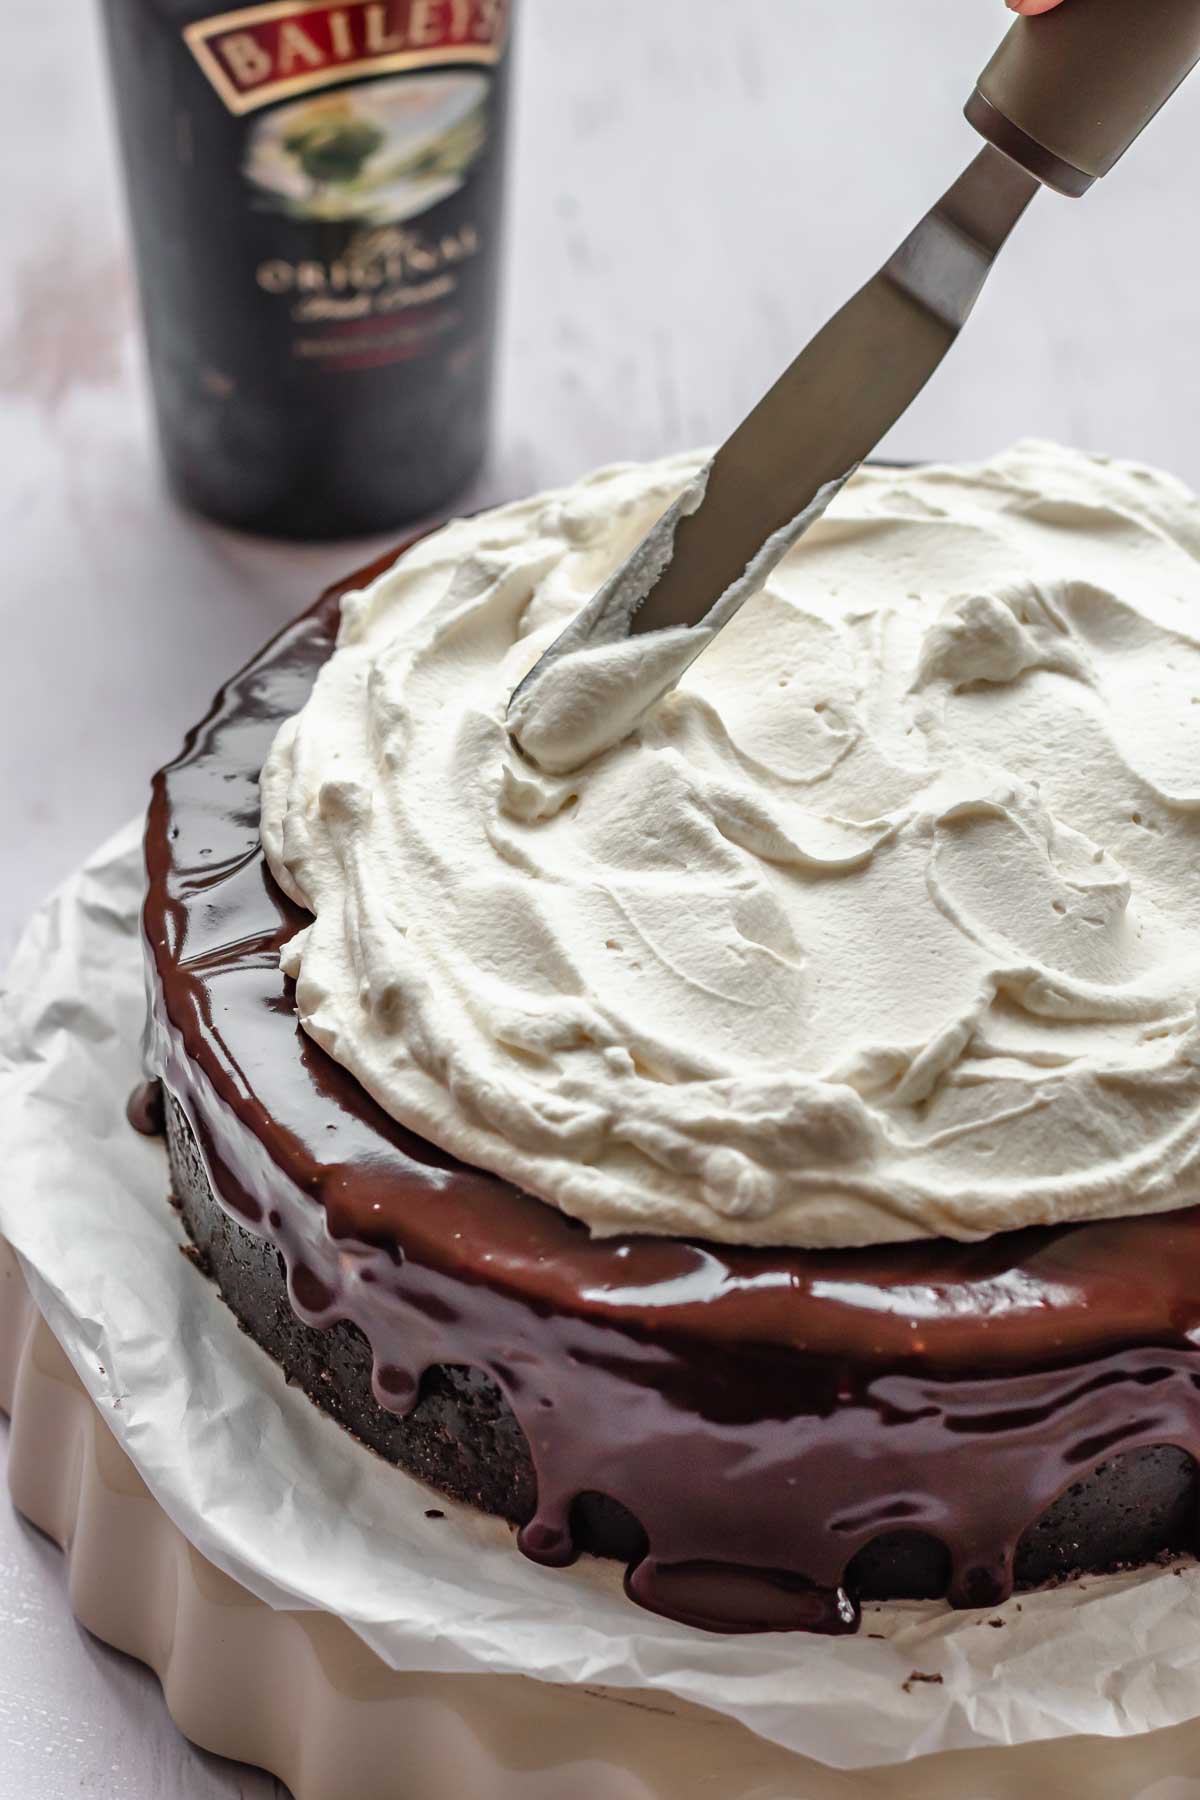 A spatula adds whipped cream on top of the ganache.